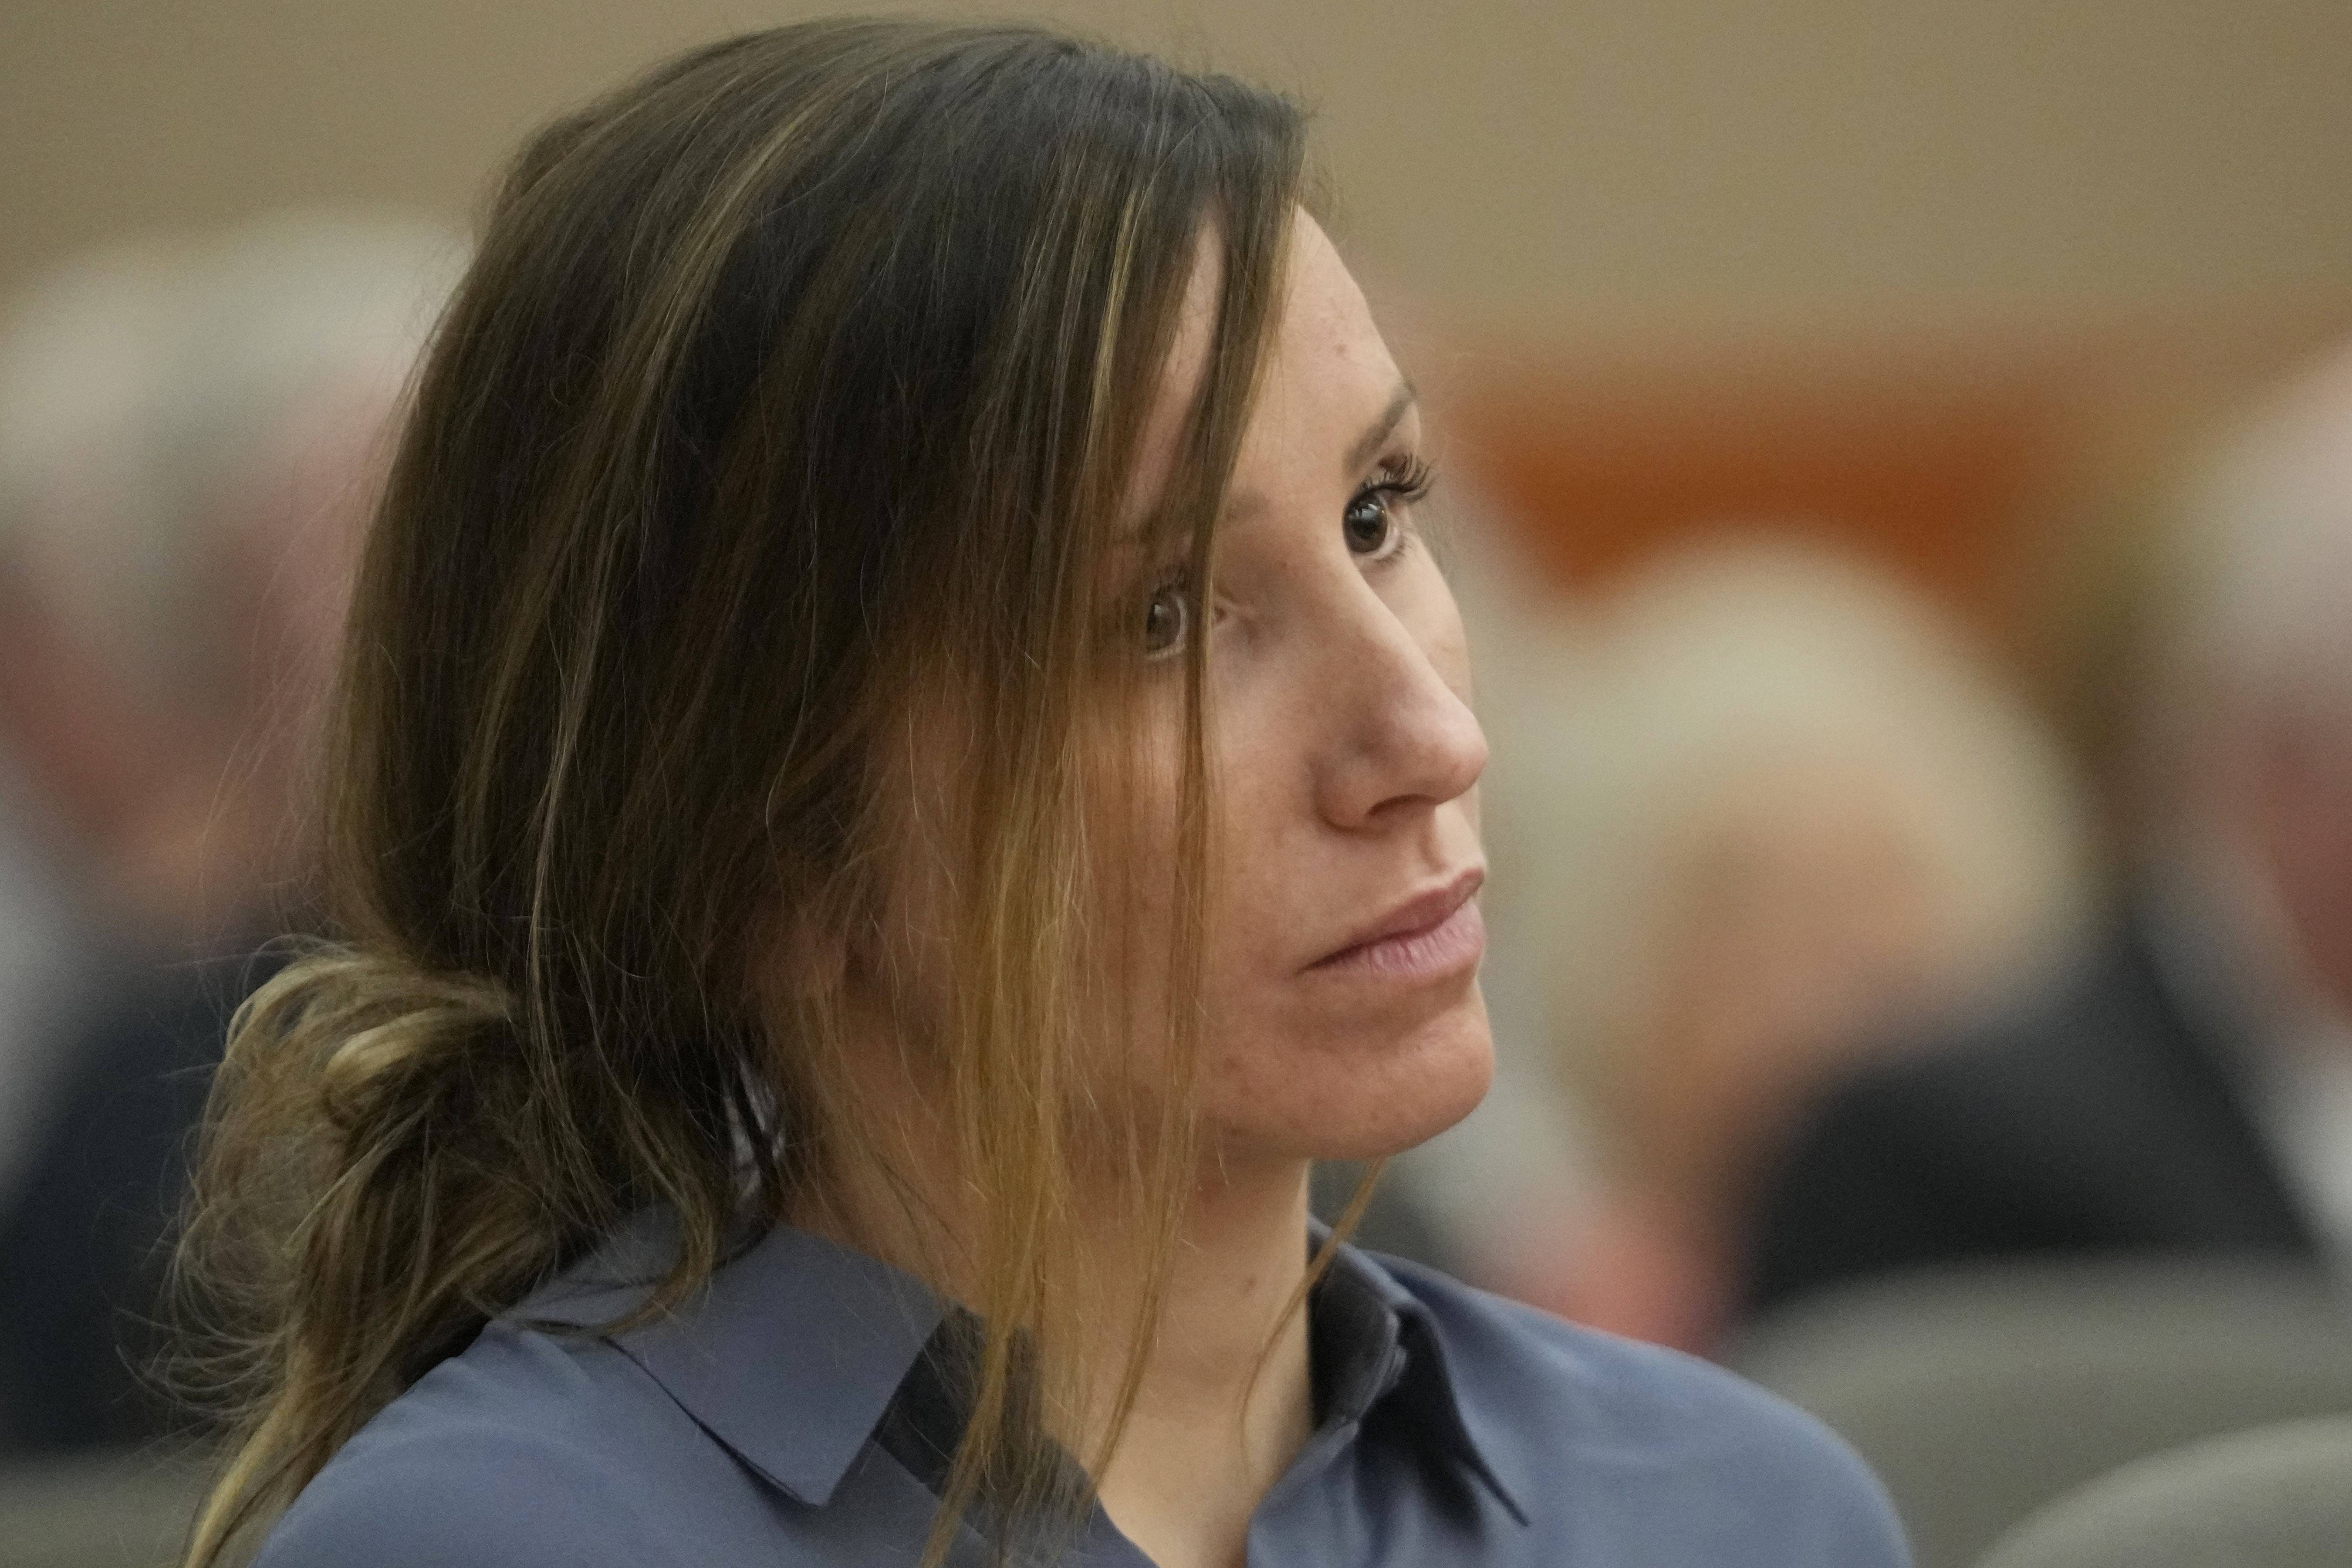 Kouri Richins case Prosecutors suspect witness tampering, citing letter Richins wrote mom in jail photo